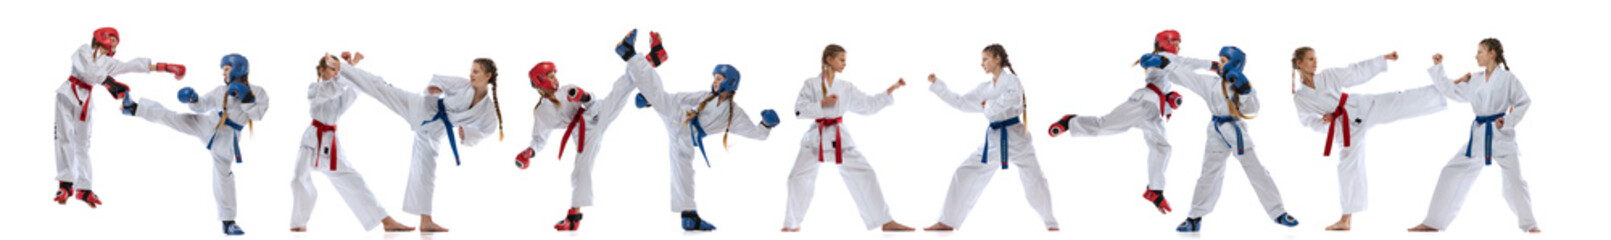 Horizontal flyer with images of two young girls, teens, taekwondo athletes wearing doboks and...